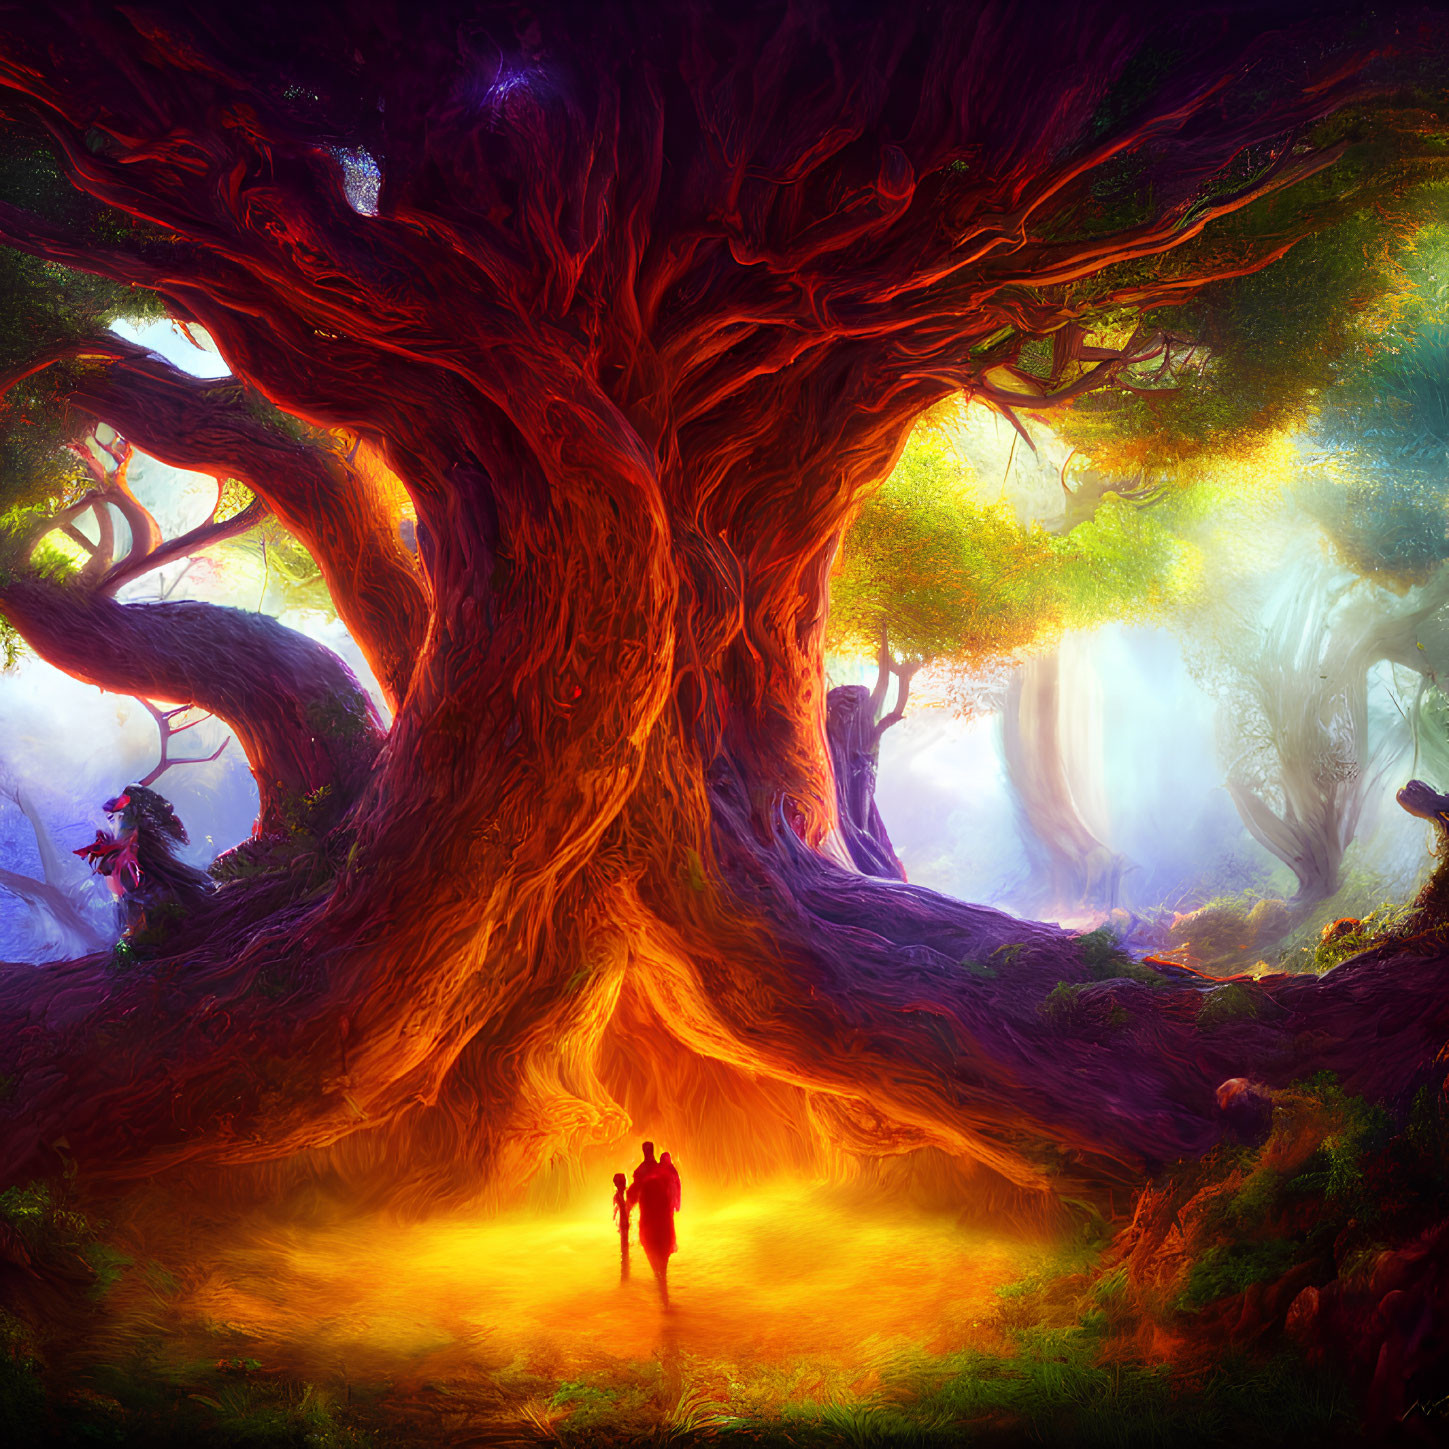 Illustration of mystical tree with fiery roots and figures in enchanted forest